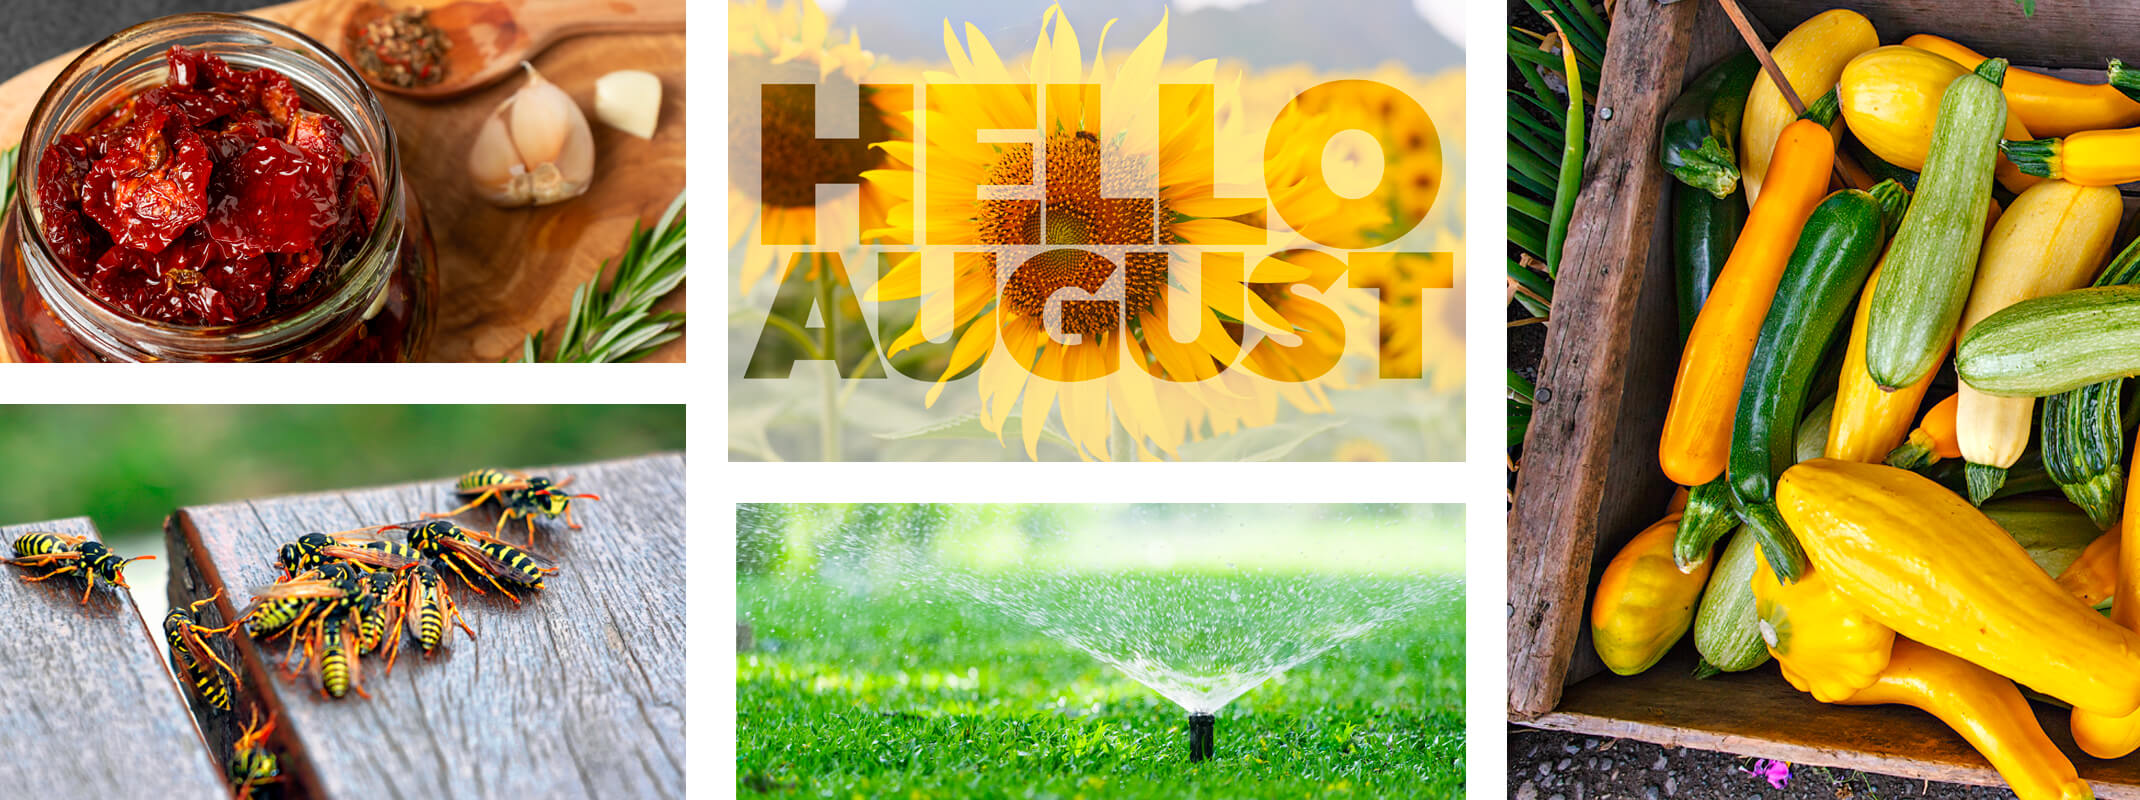 august gardening monthly tips for calendar with the words hello august